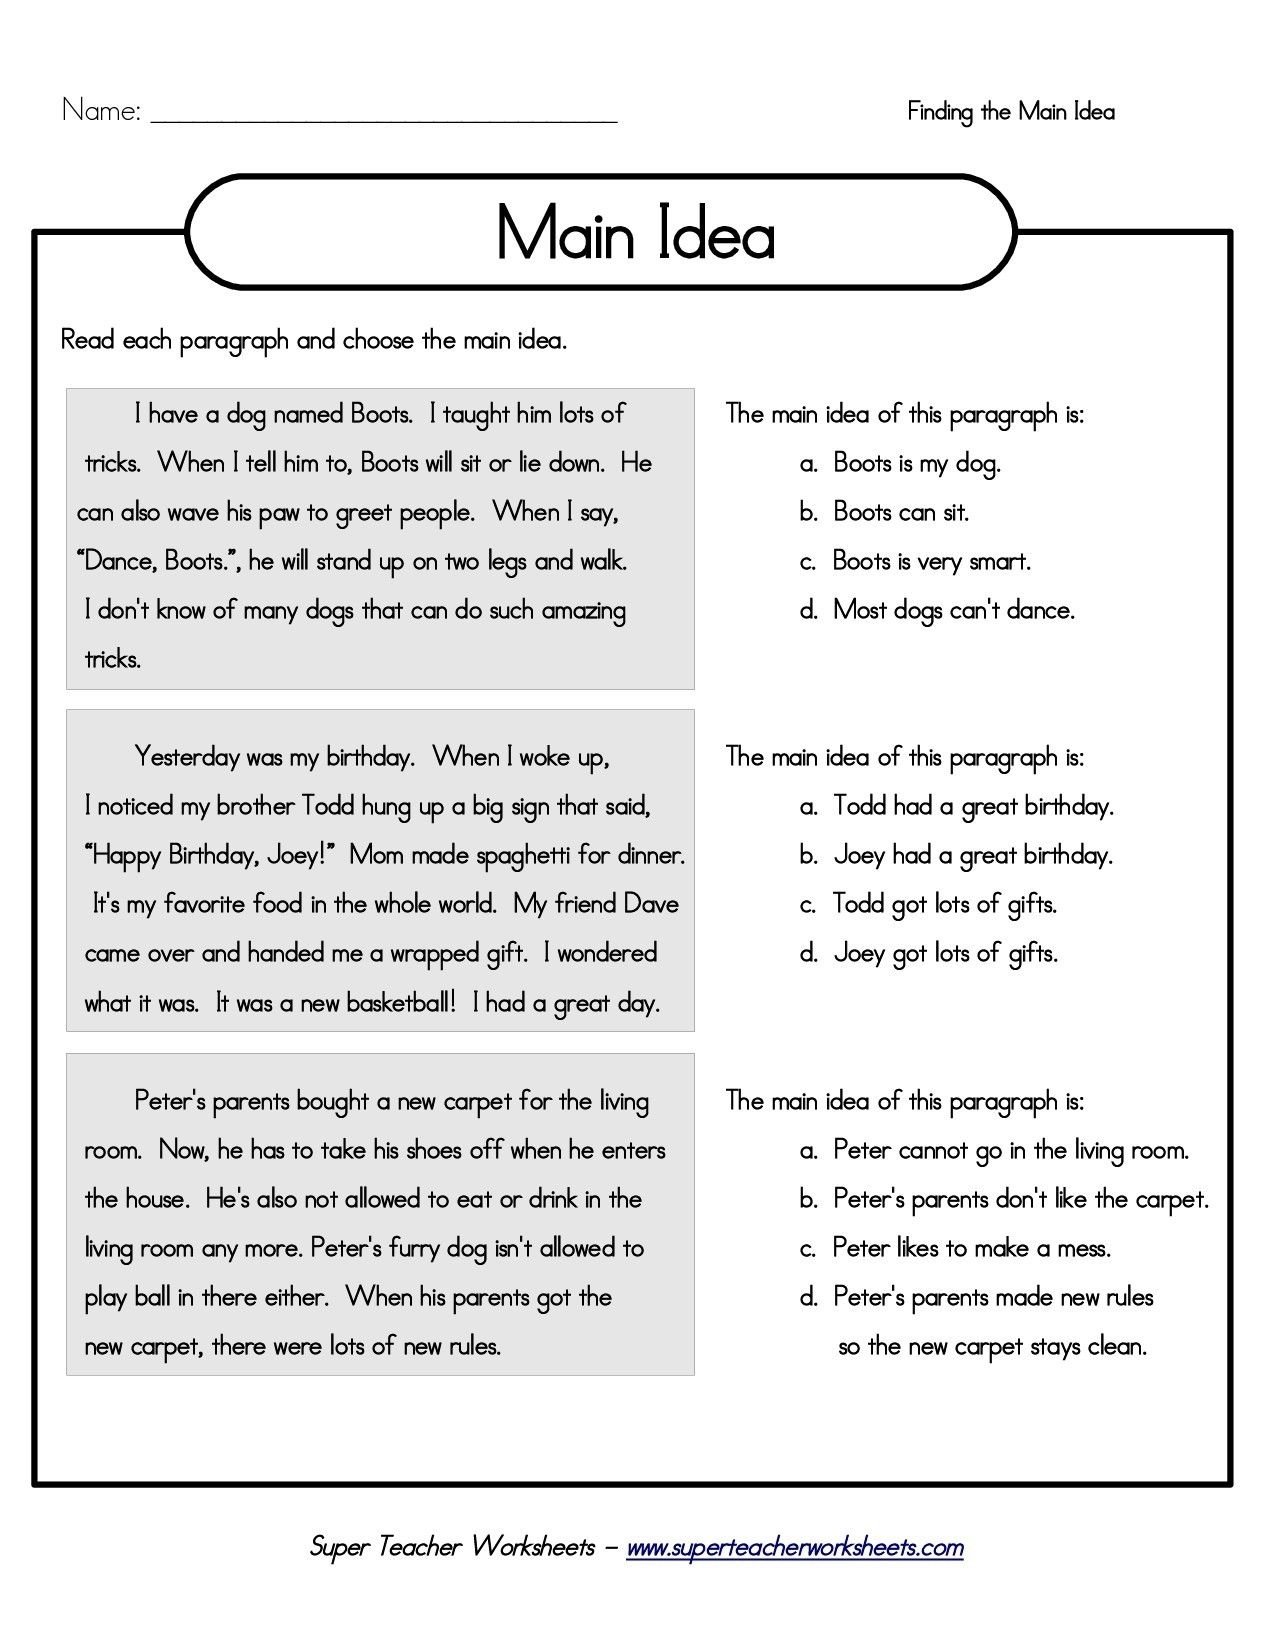 10 Most Recommended Find The Main Idea Worksheets printable 5th grade main idea worksheets main idea and details 47 2022